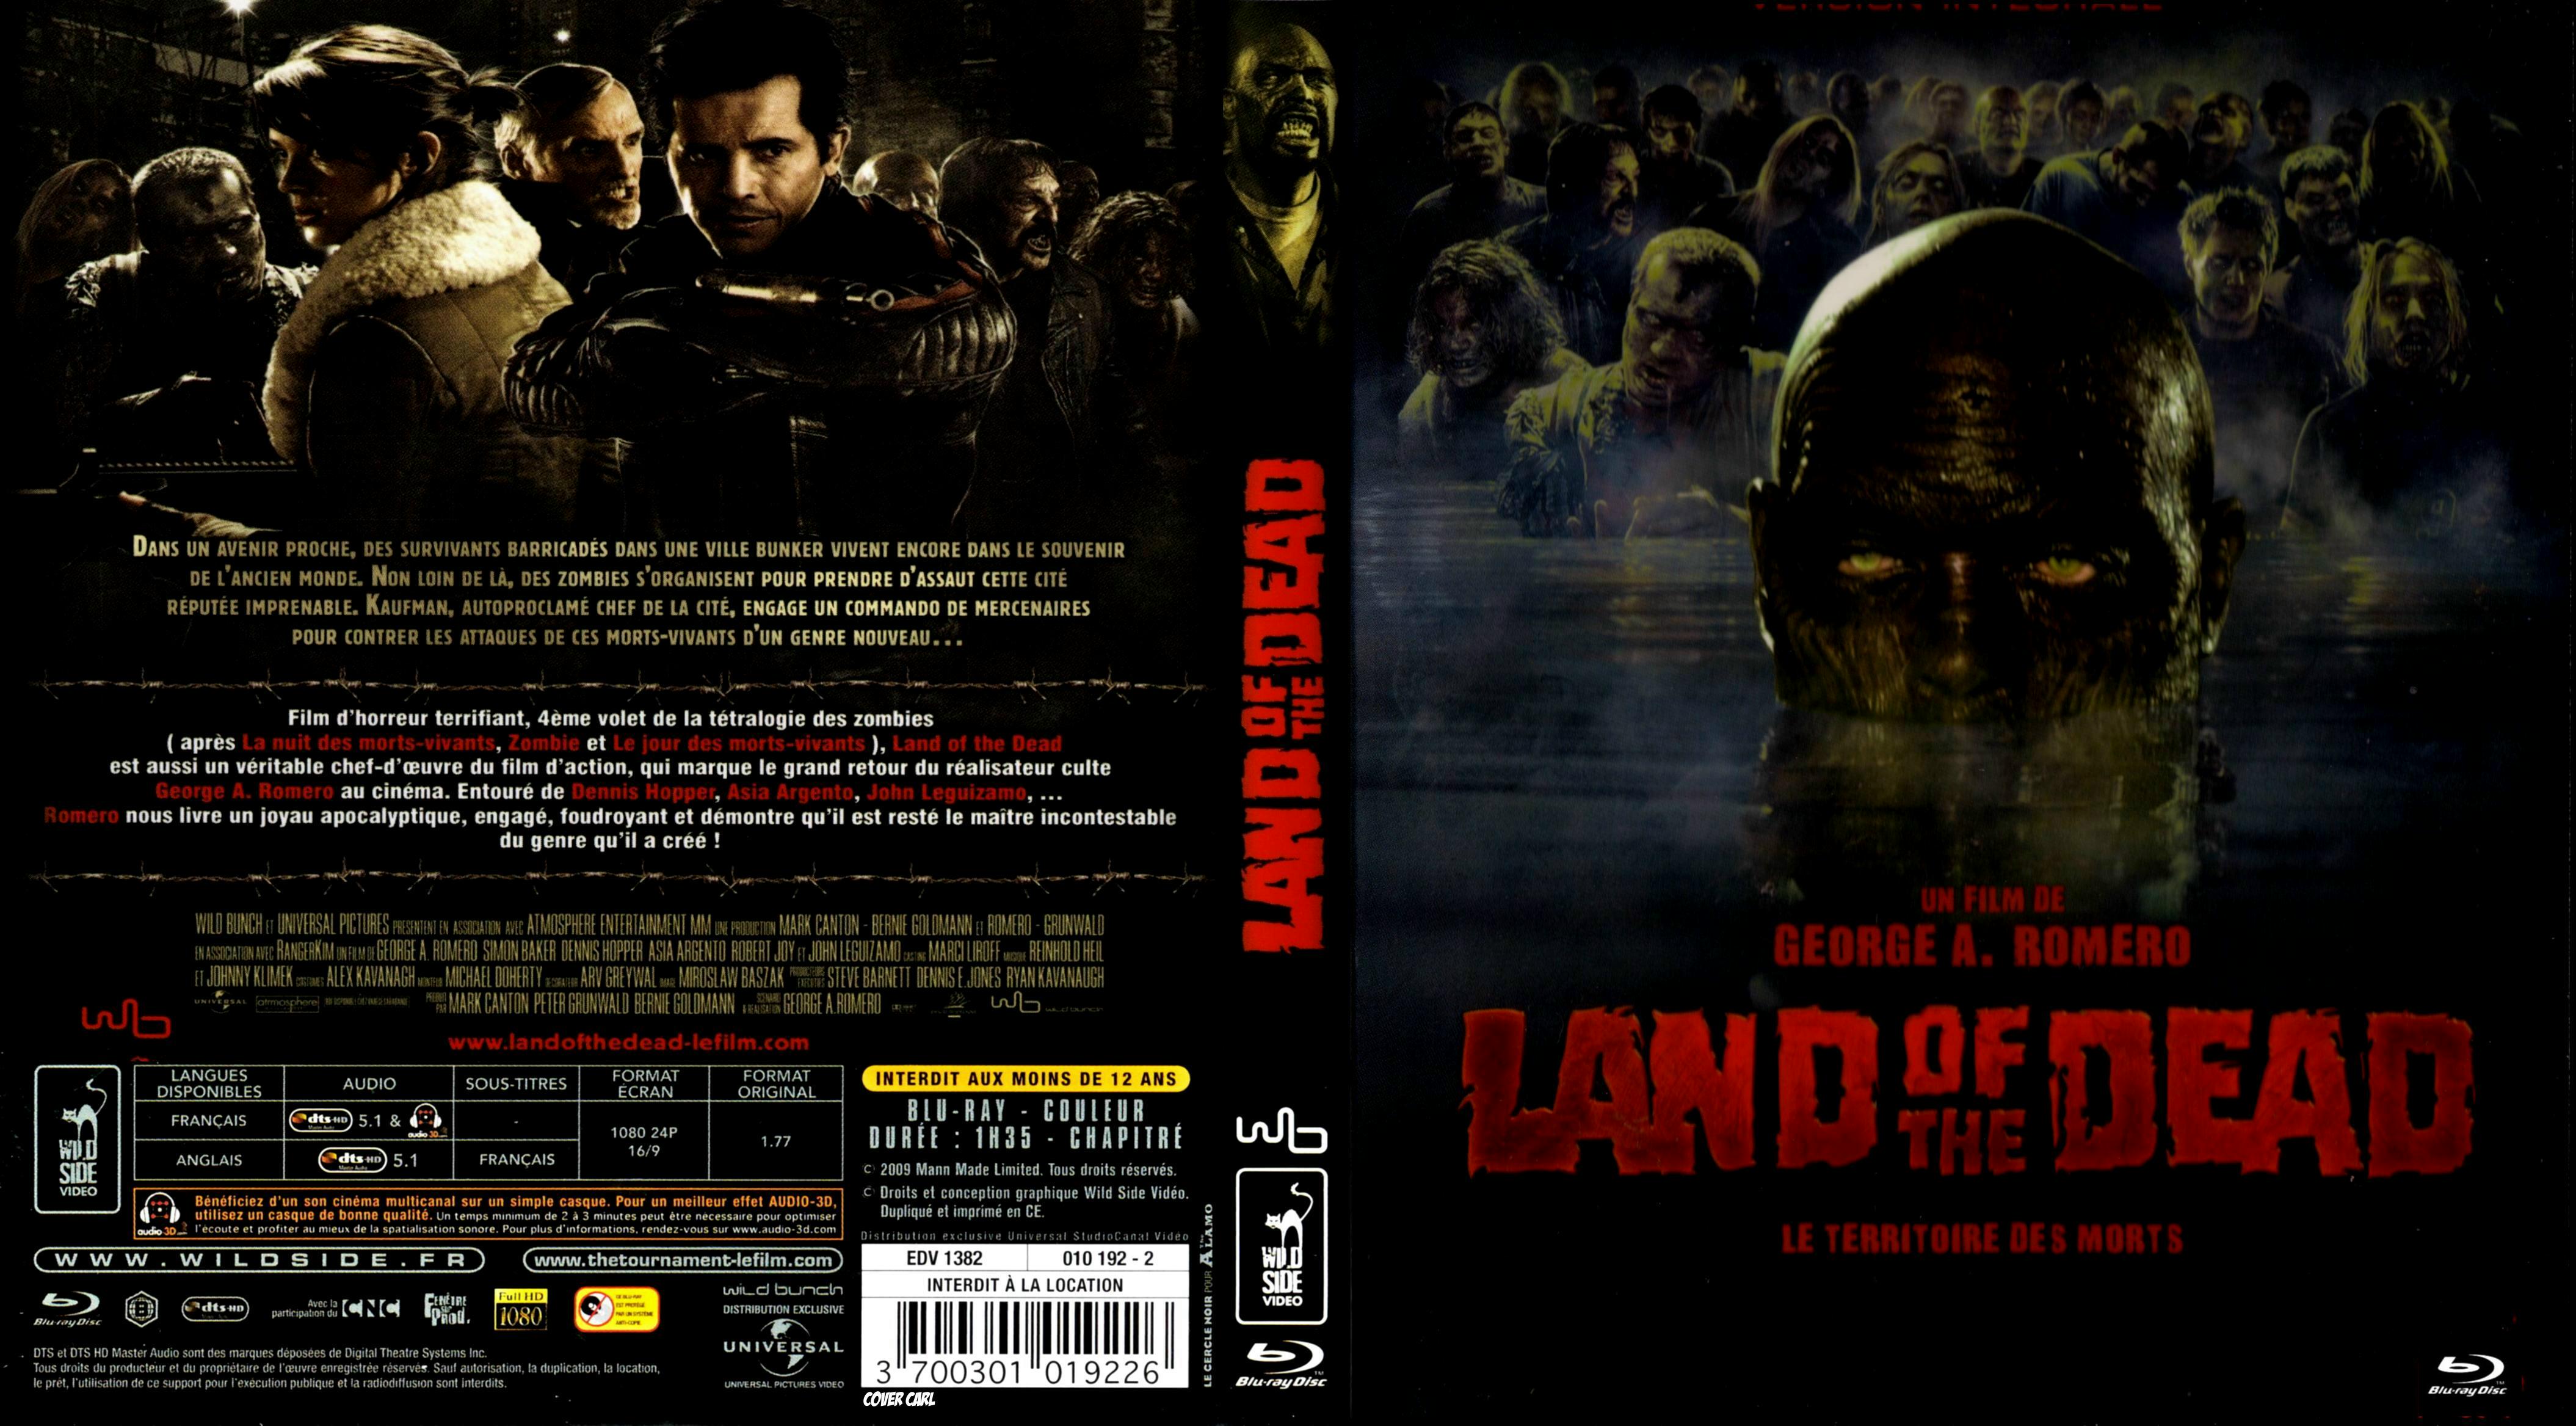 Jaquette DVD Land of the dead custom (BLU-RAY)